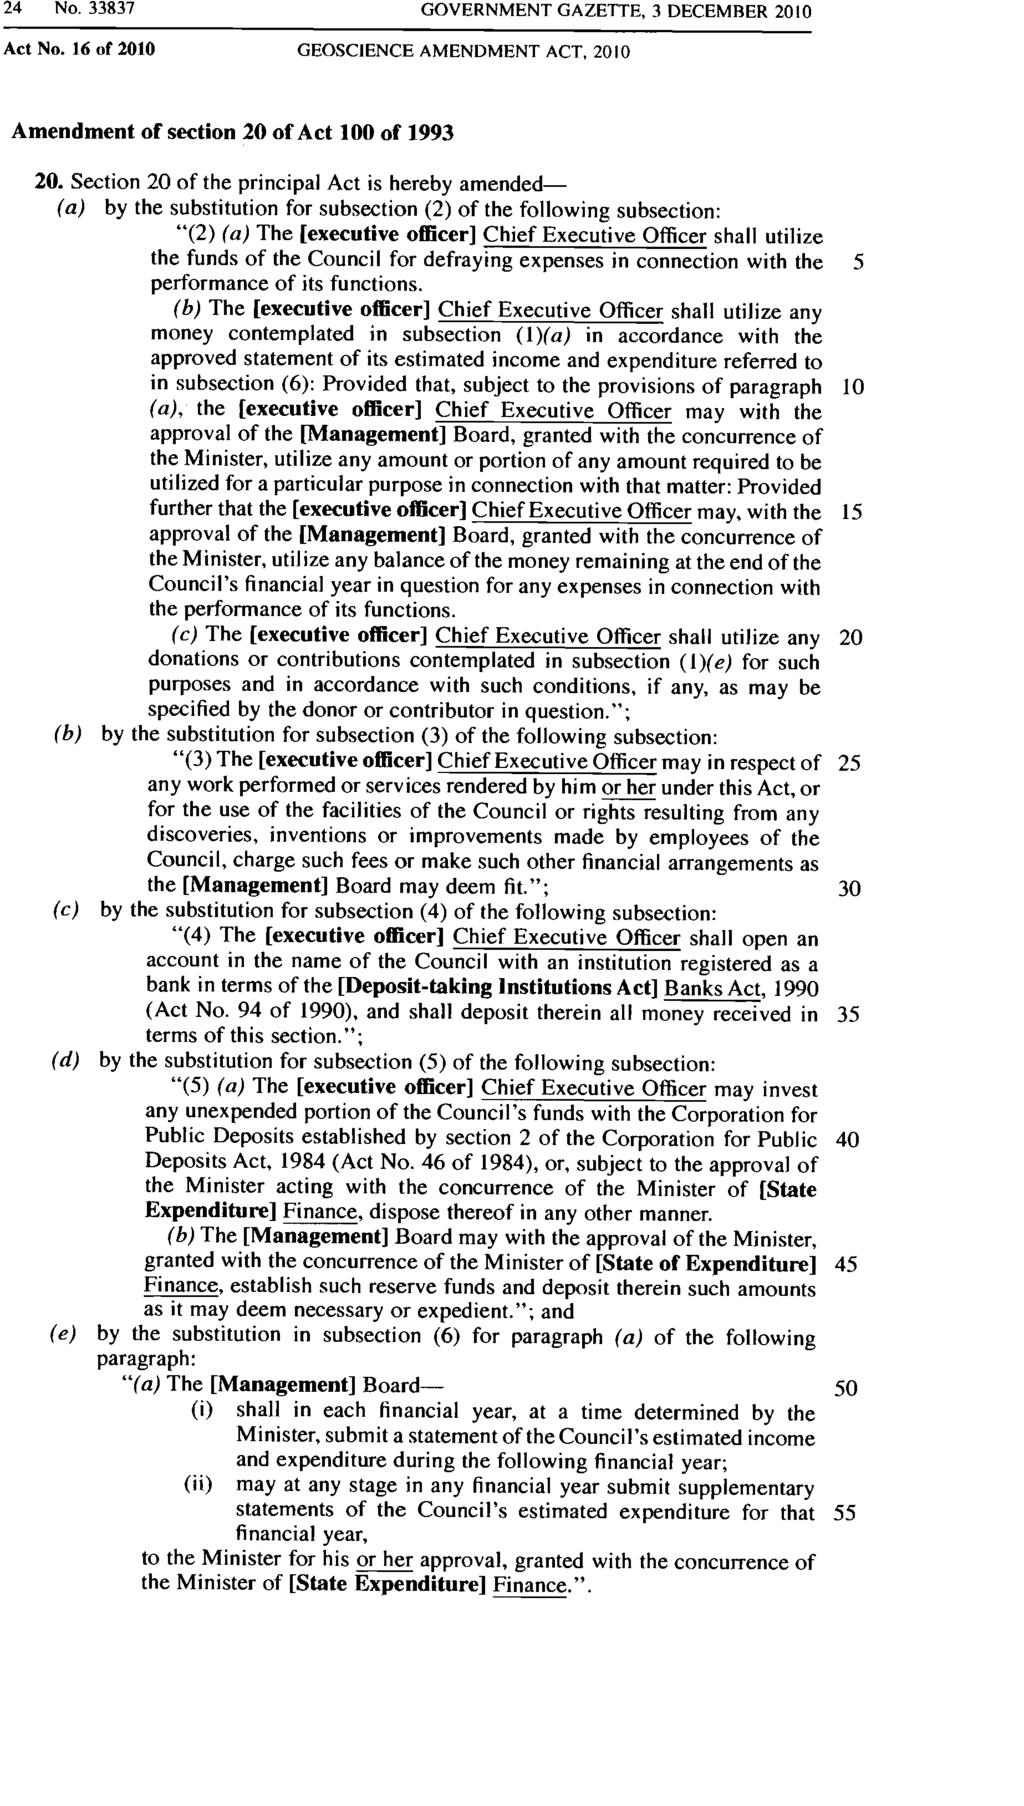 24 No. 33837 GOVERNMENT GAZETTE, 3 DECEMBER 2010 Act No. 16 of 2010 GEOSCIENCE AMENDMENT ACT, 2010 Amendment of section 20 of Act 100 of 1993 20.